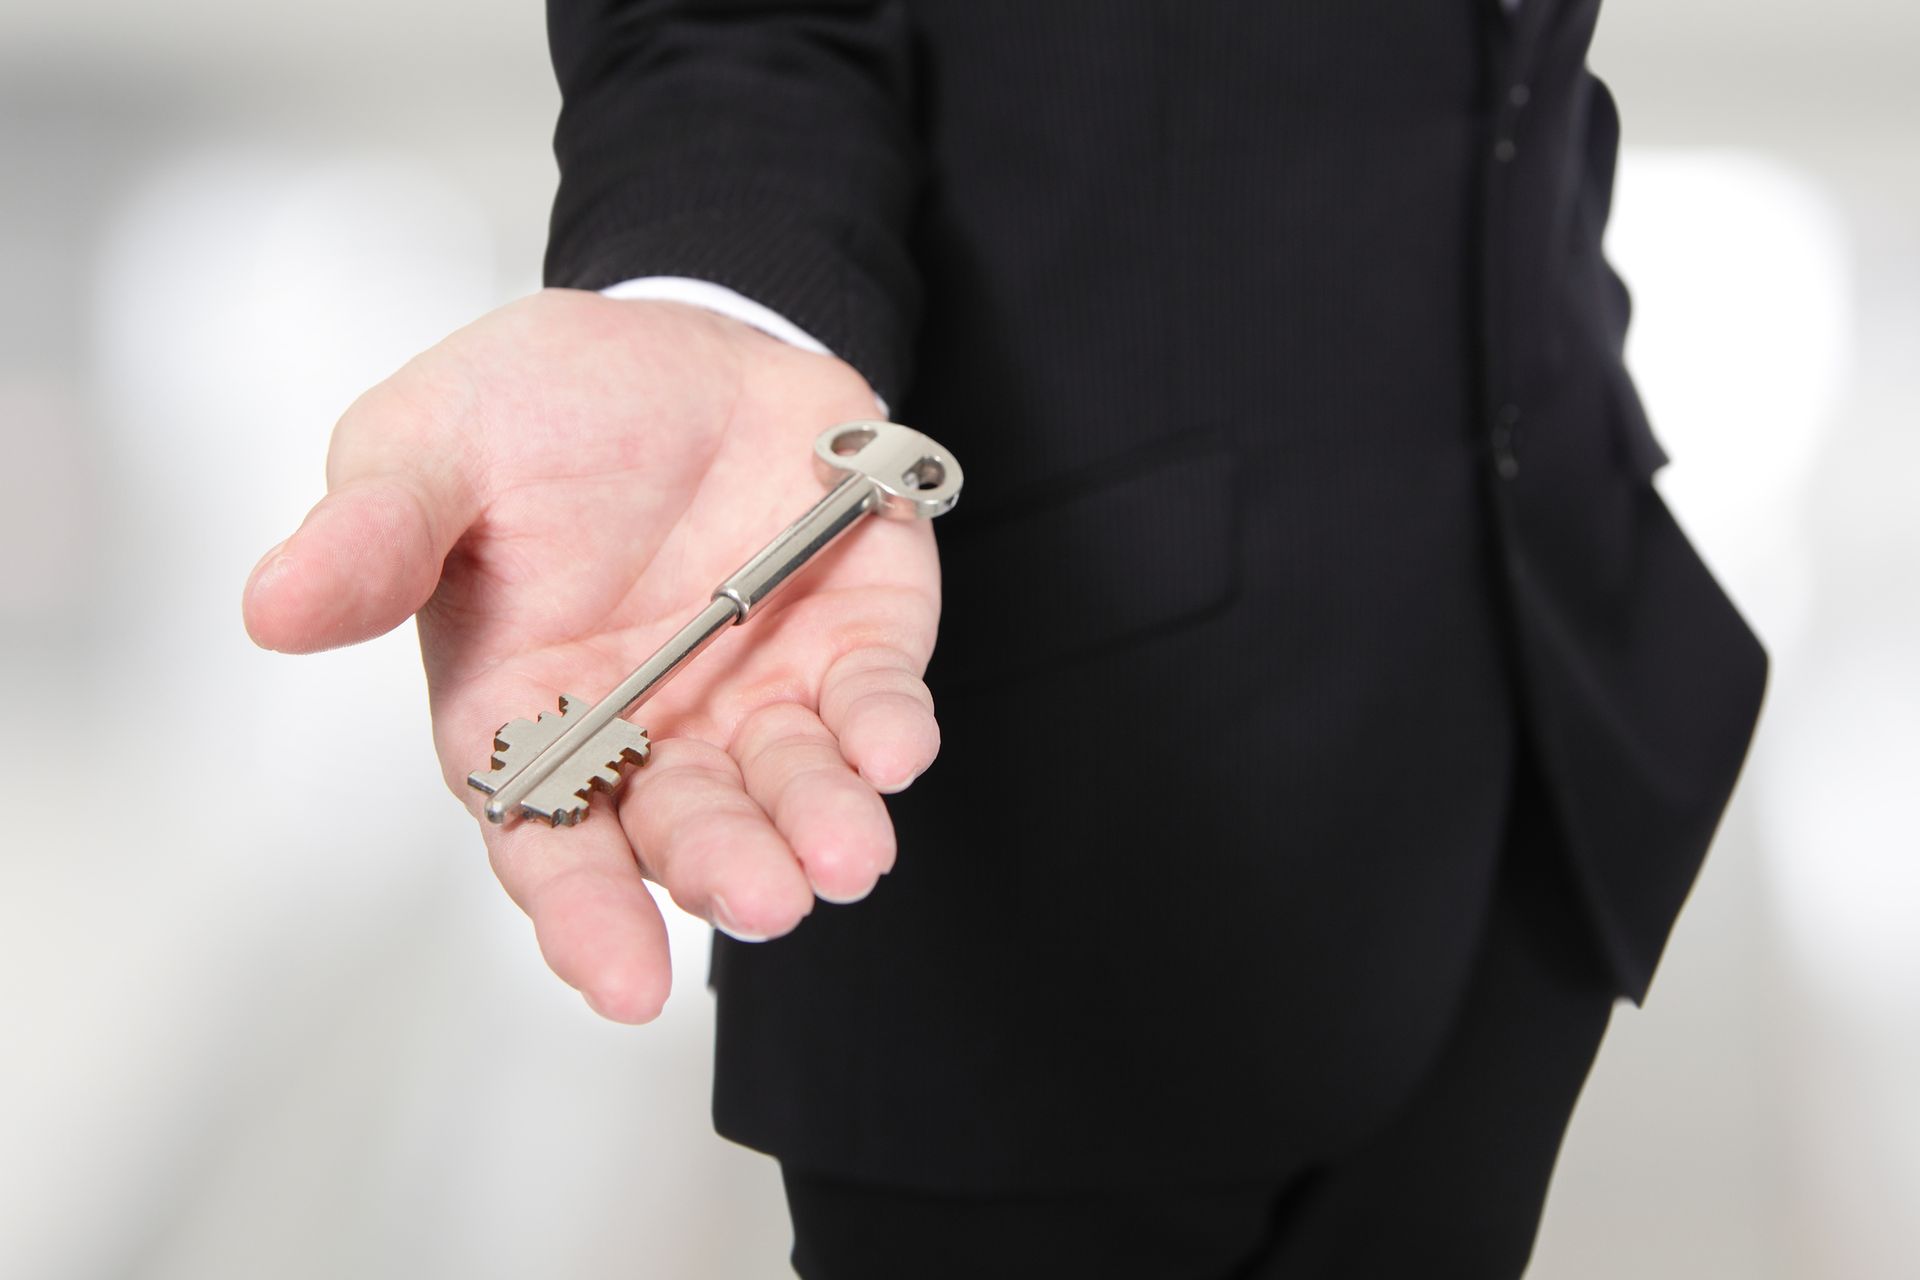 a man in a suit is holding a key in his hand